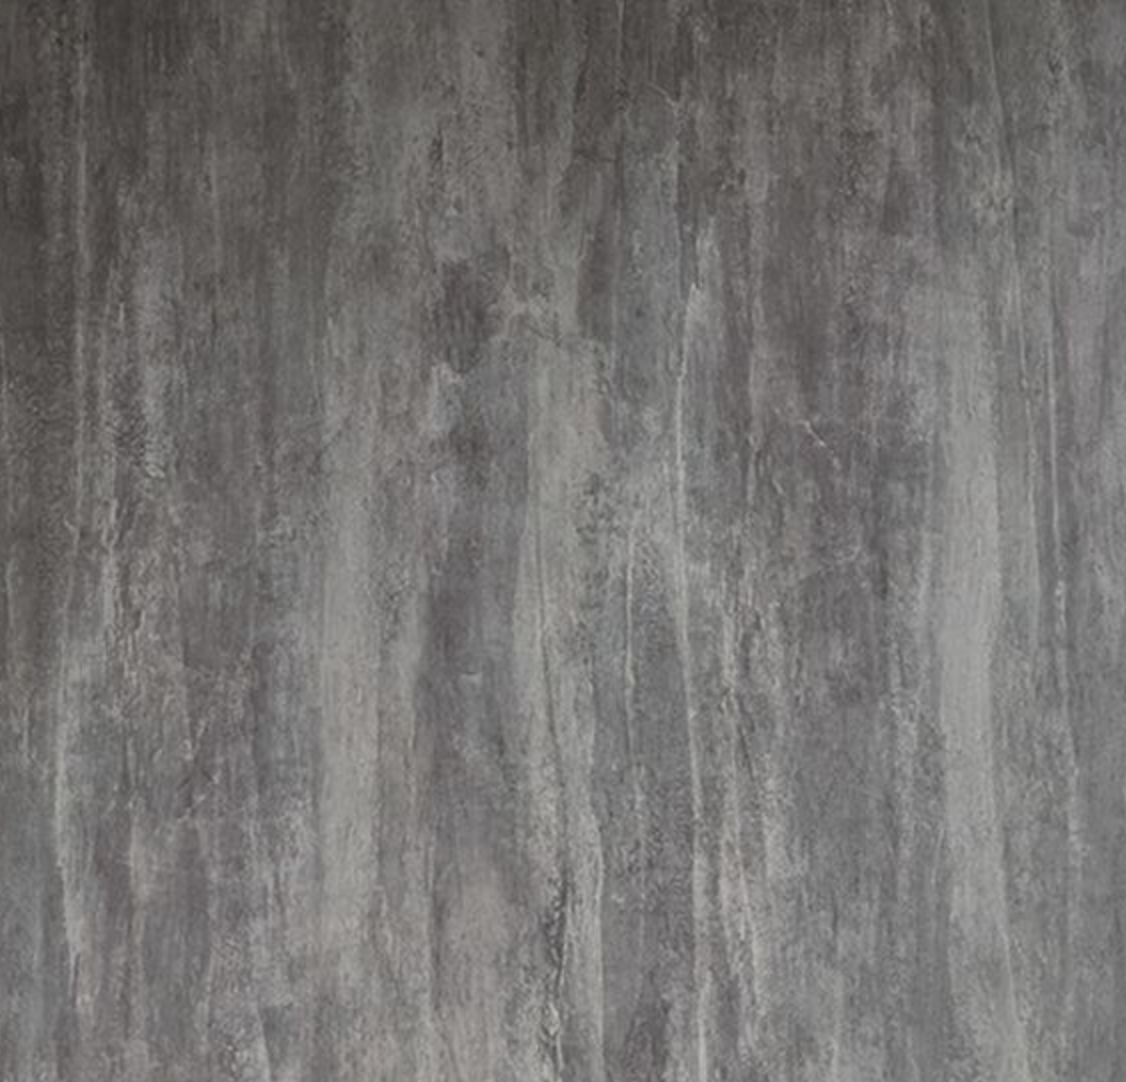 Showerwall Laminate Quarry Collection - Washed Charcoal